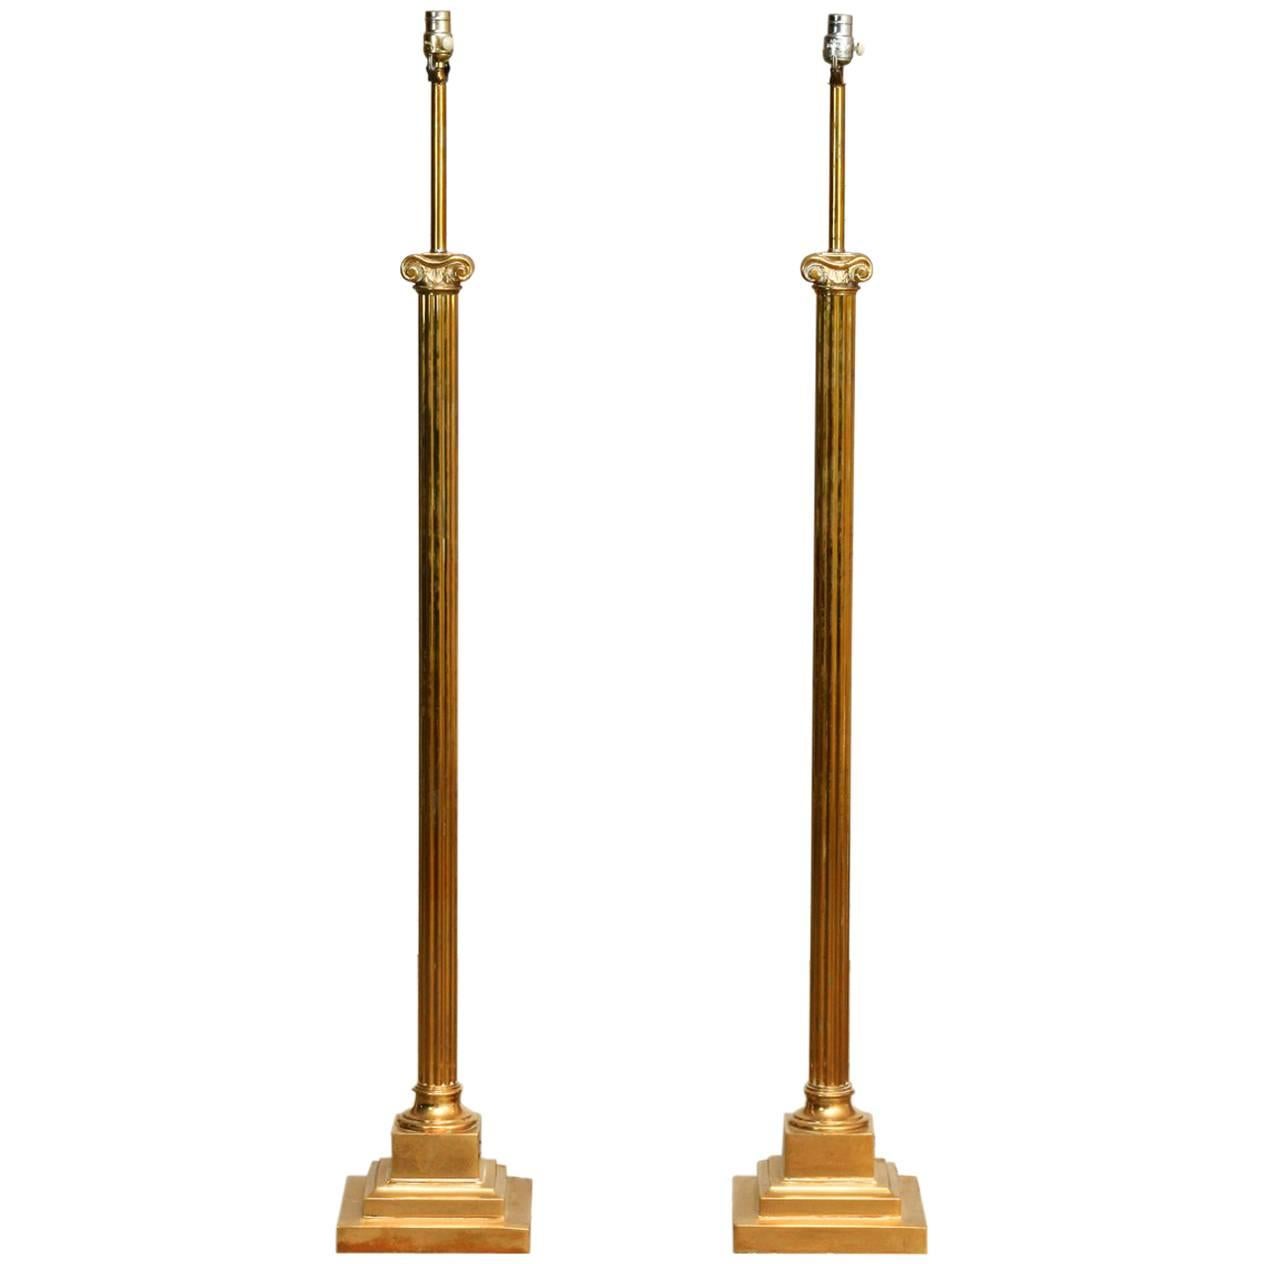 Pair of Neoclassical Fluted Brass Column Floor Lamps